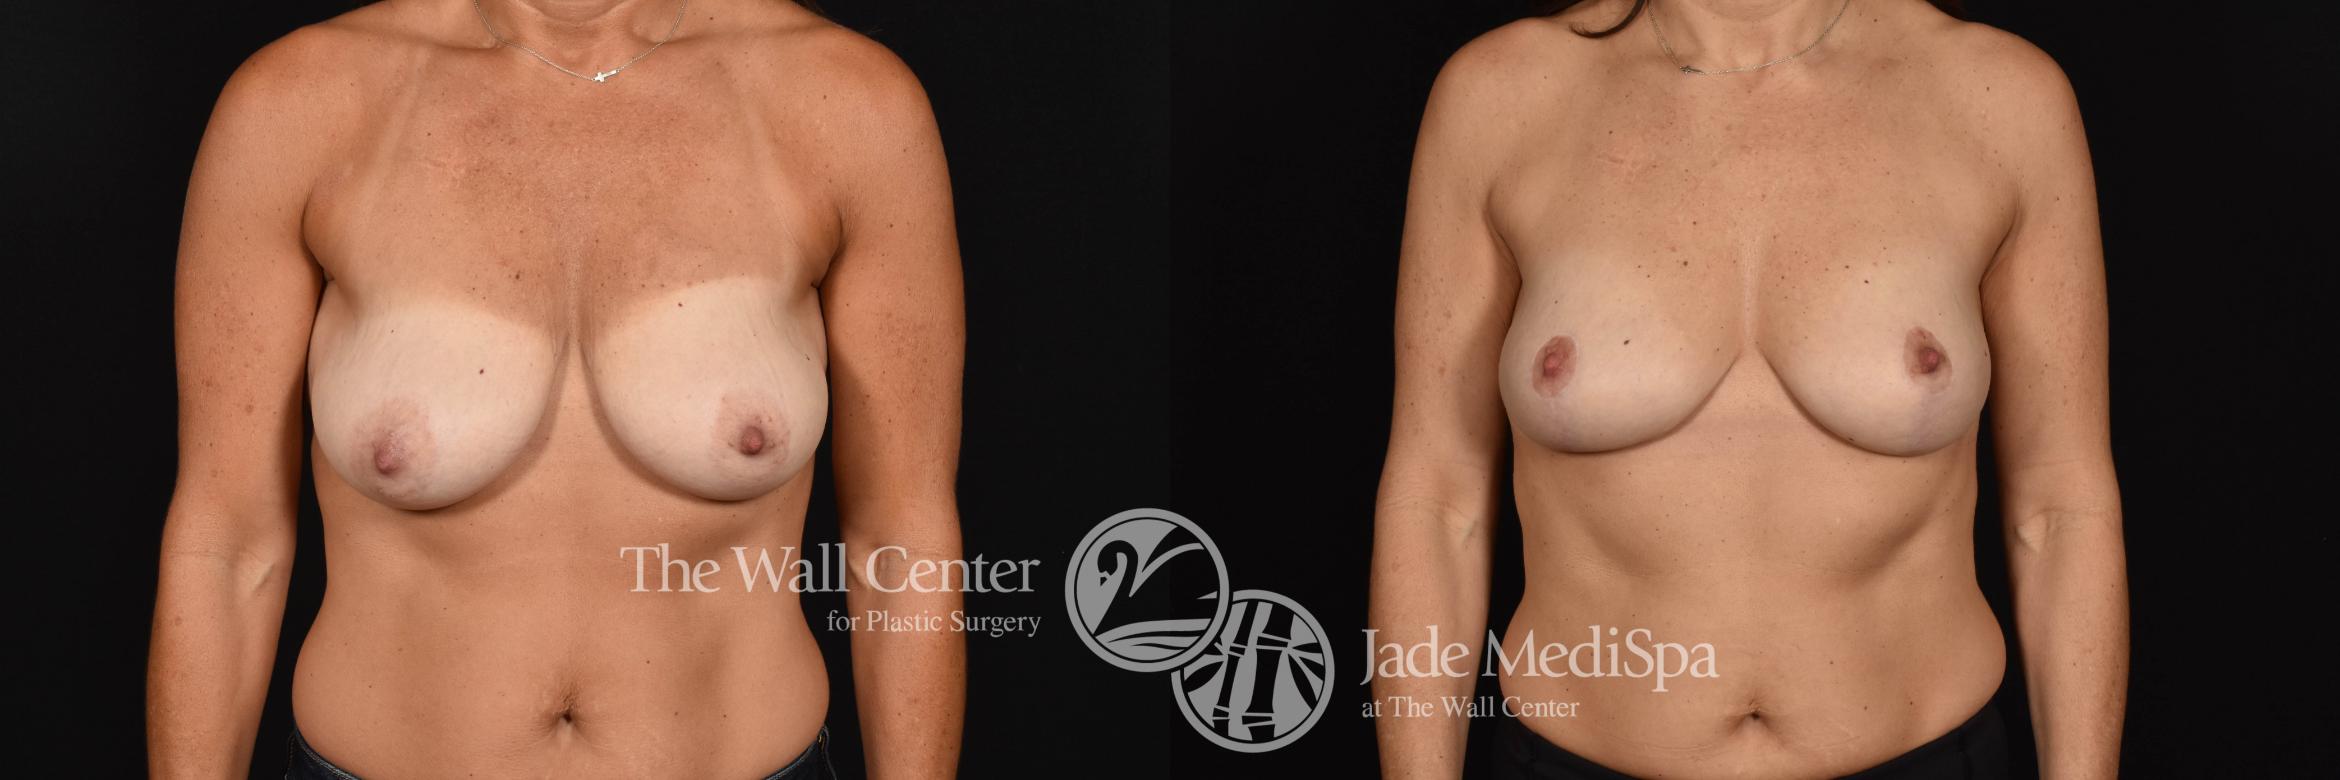 Breast Left Front Photo, Shreveport, Louisiana, The Wall Center for Plastic Surgery, Case 892